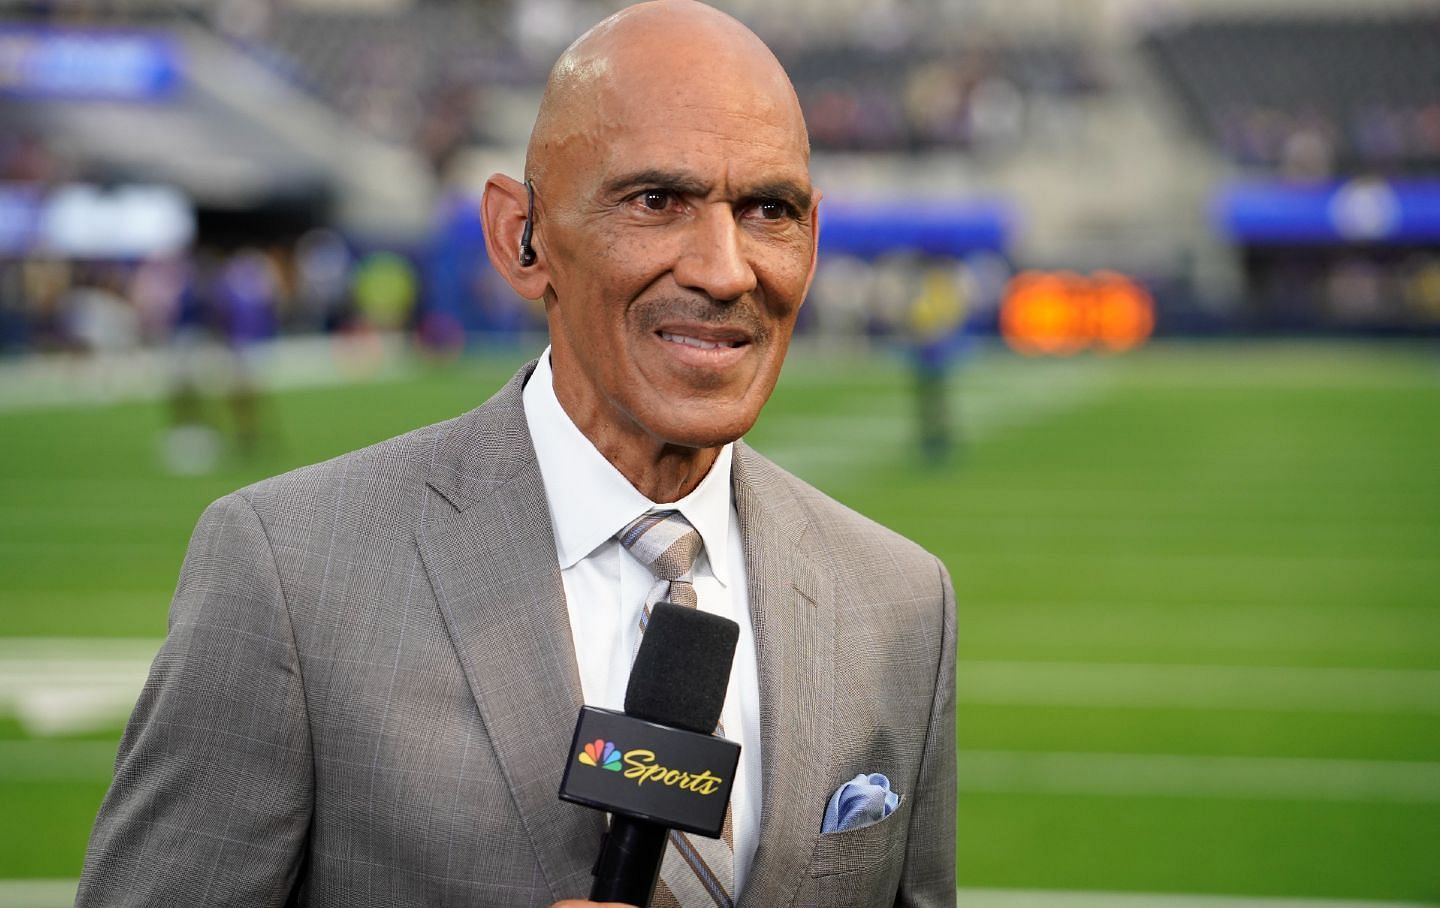 Former Indianapolis Colts HC Tony Dungy